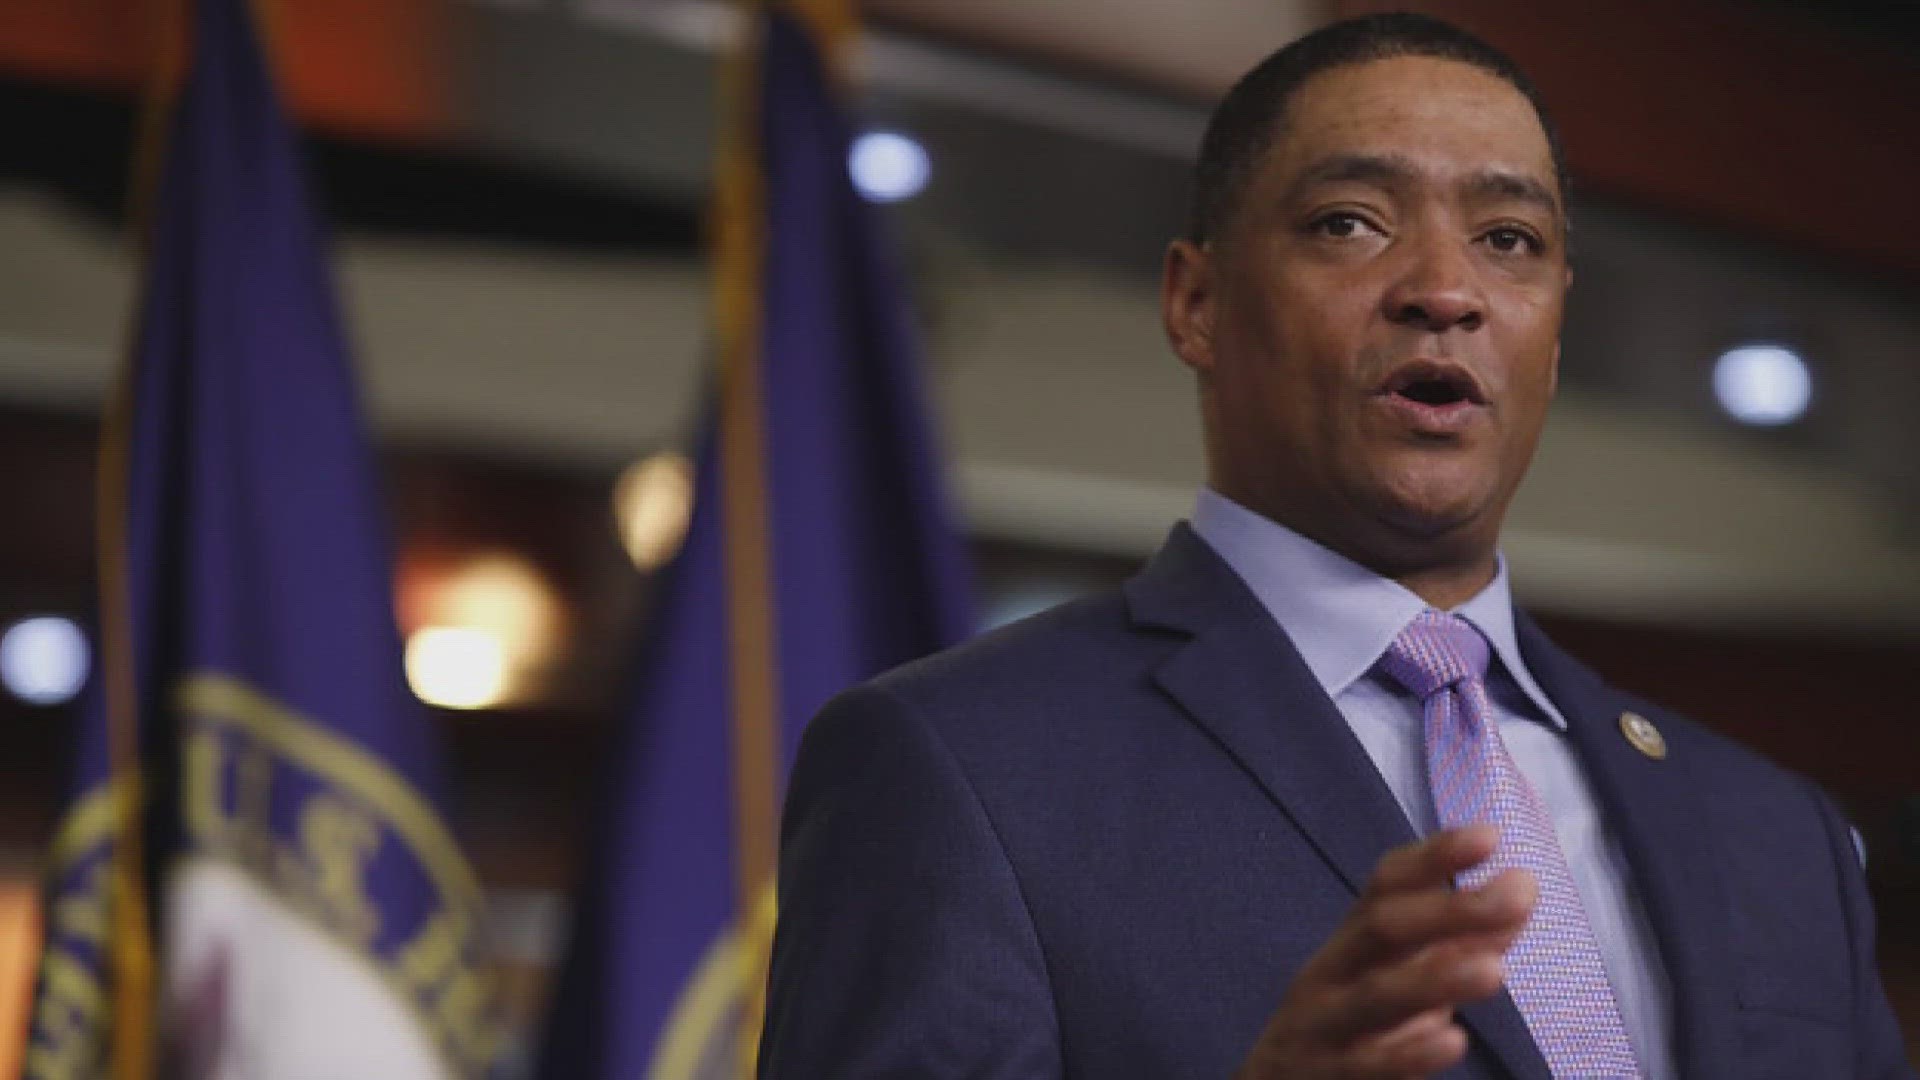 The former U.S. Rep and presidential adviser Cedric Richmond was not tested for intoxication despite a police report that said he was "disoriented."